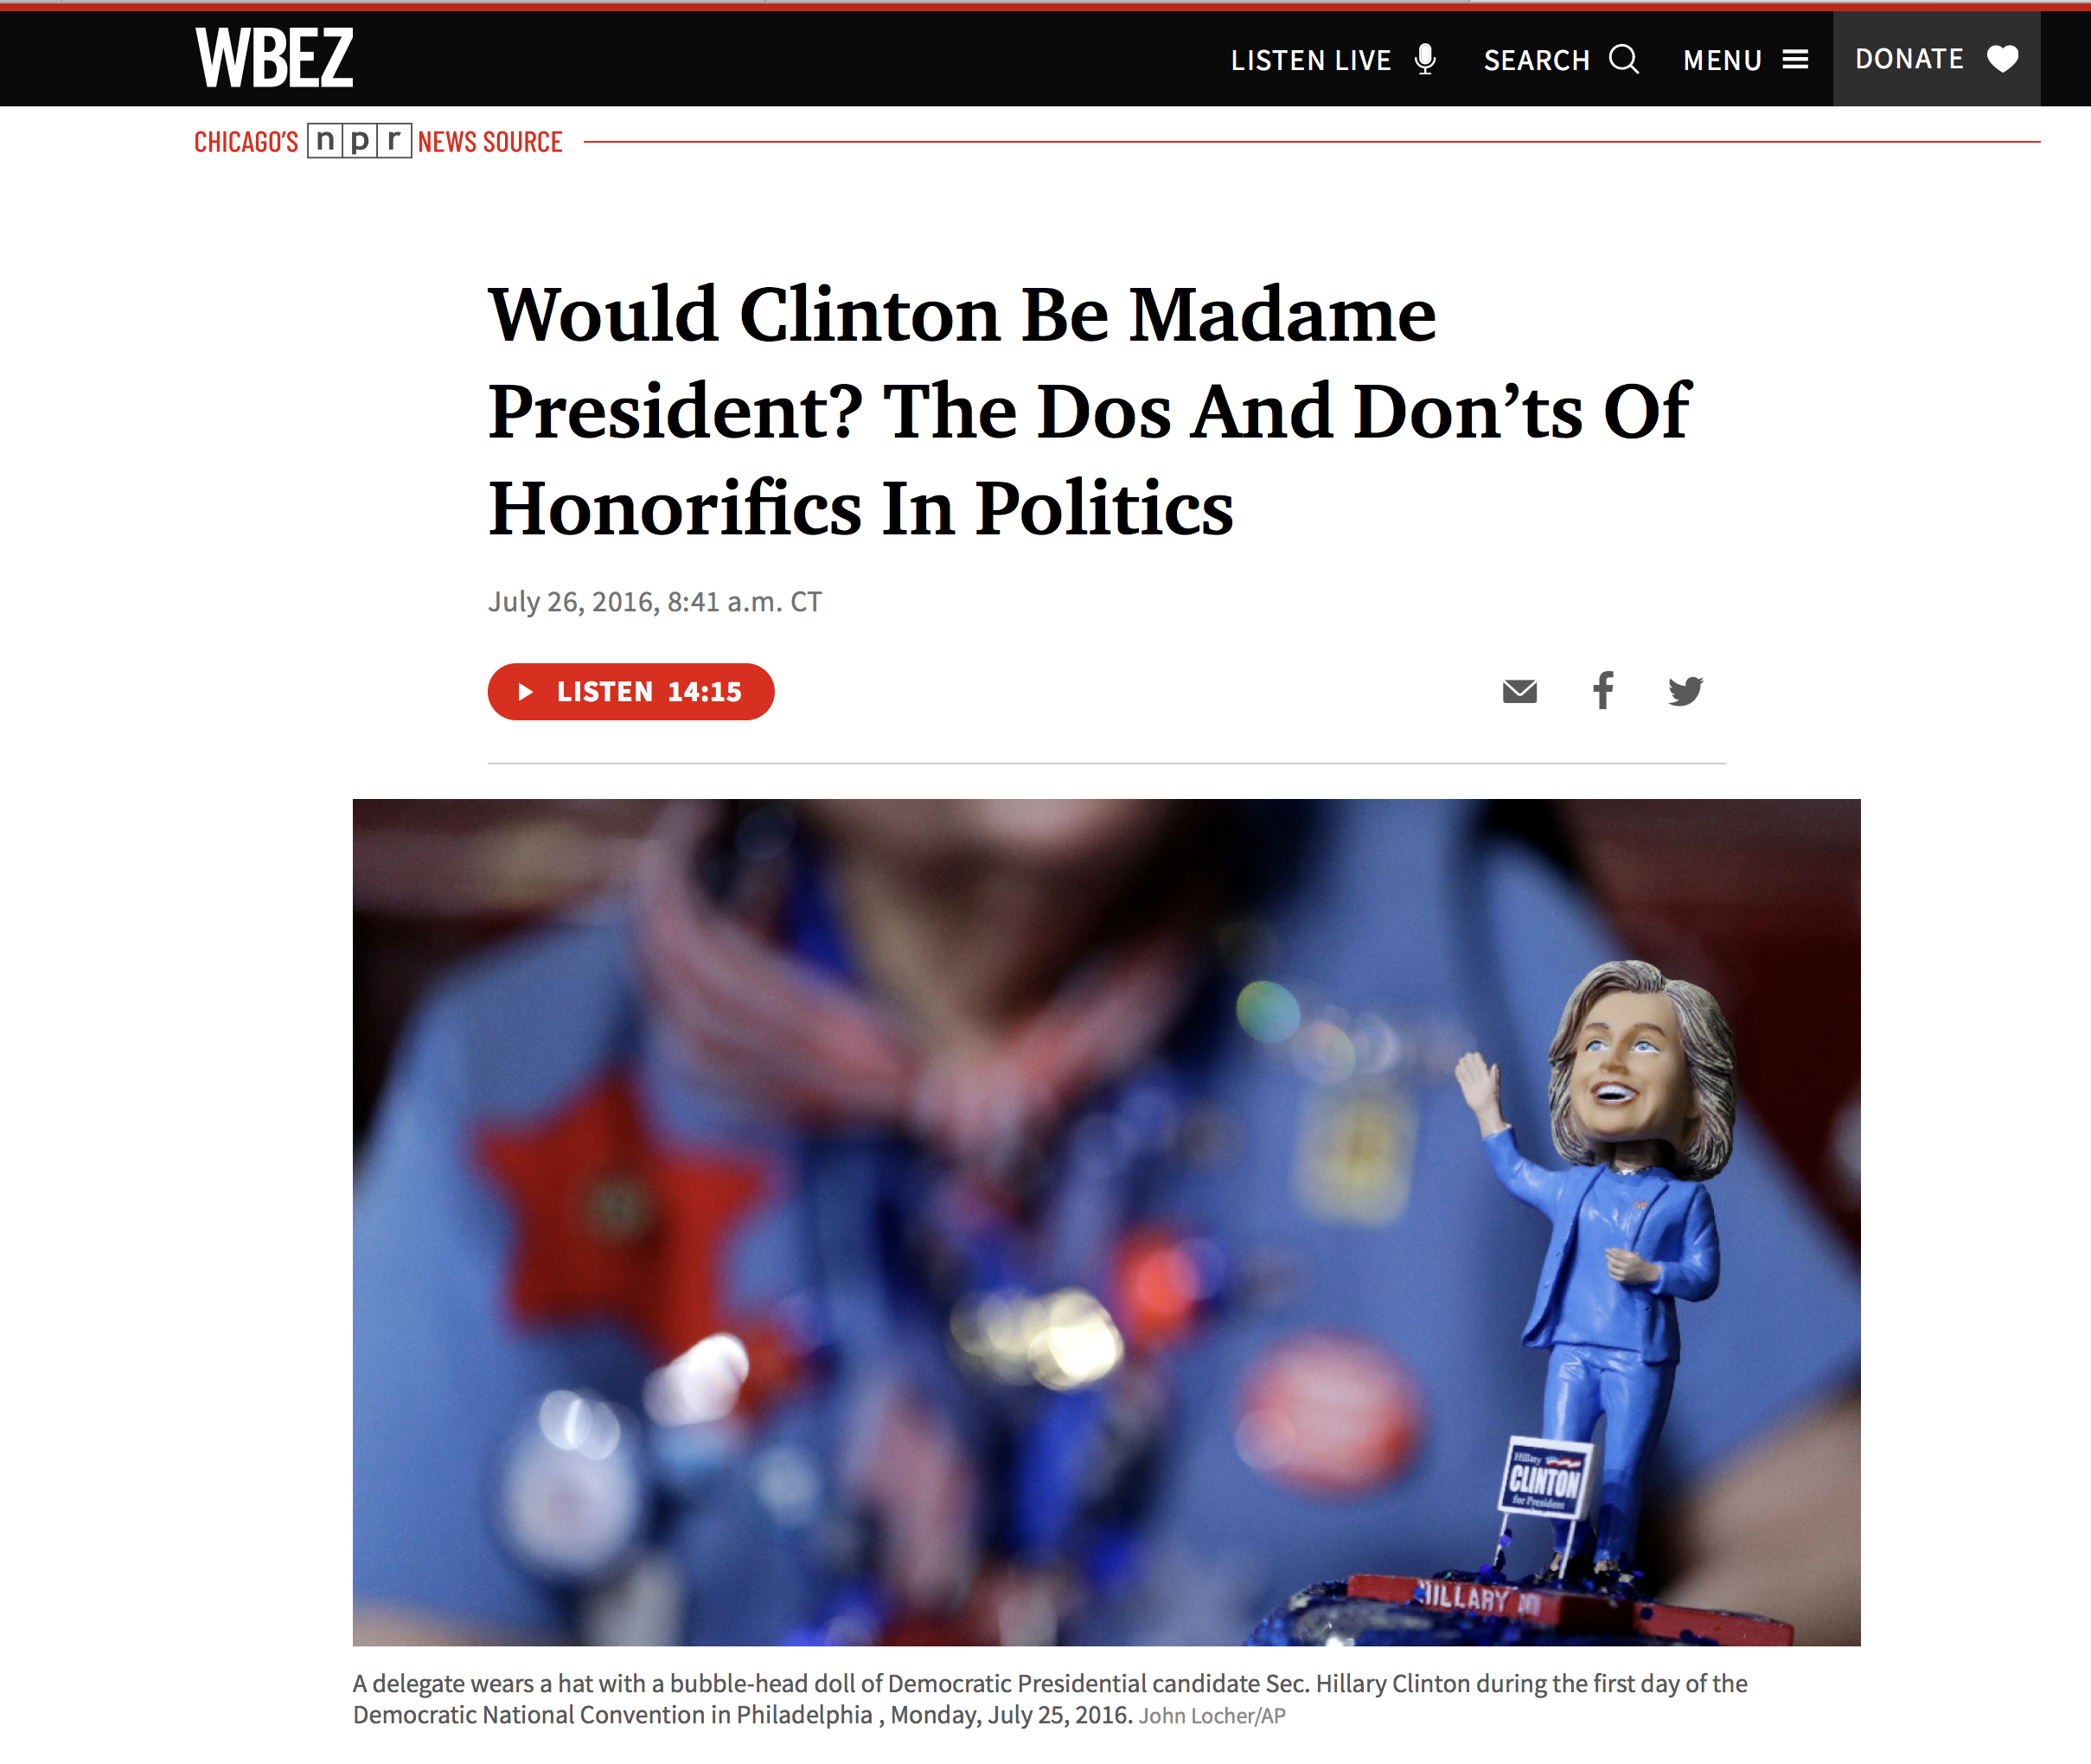 Would Clinton Be Madame President? The Dos And Don’ts Of Honorifics In Politics.